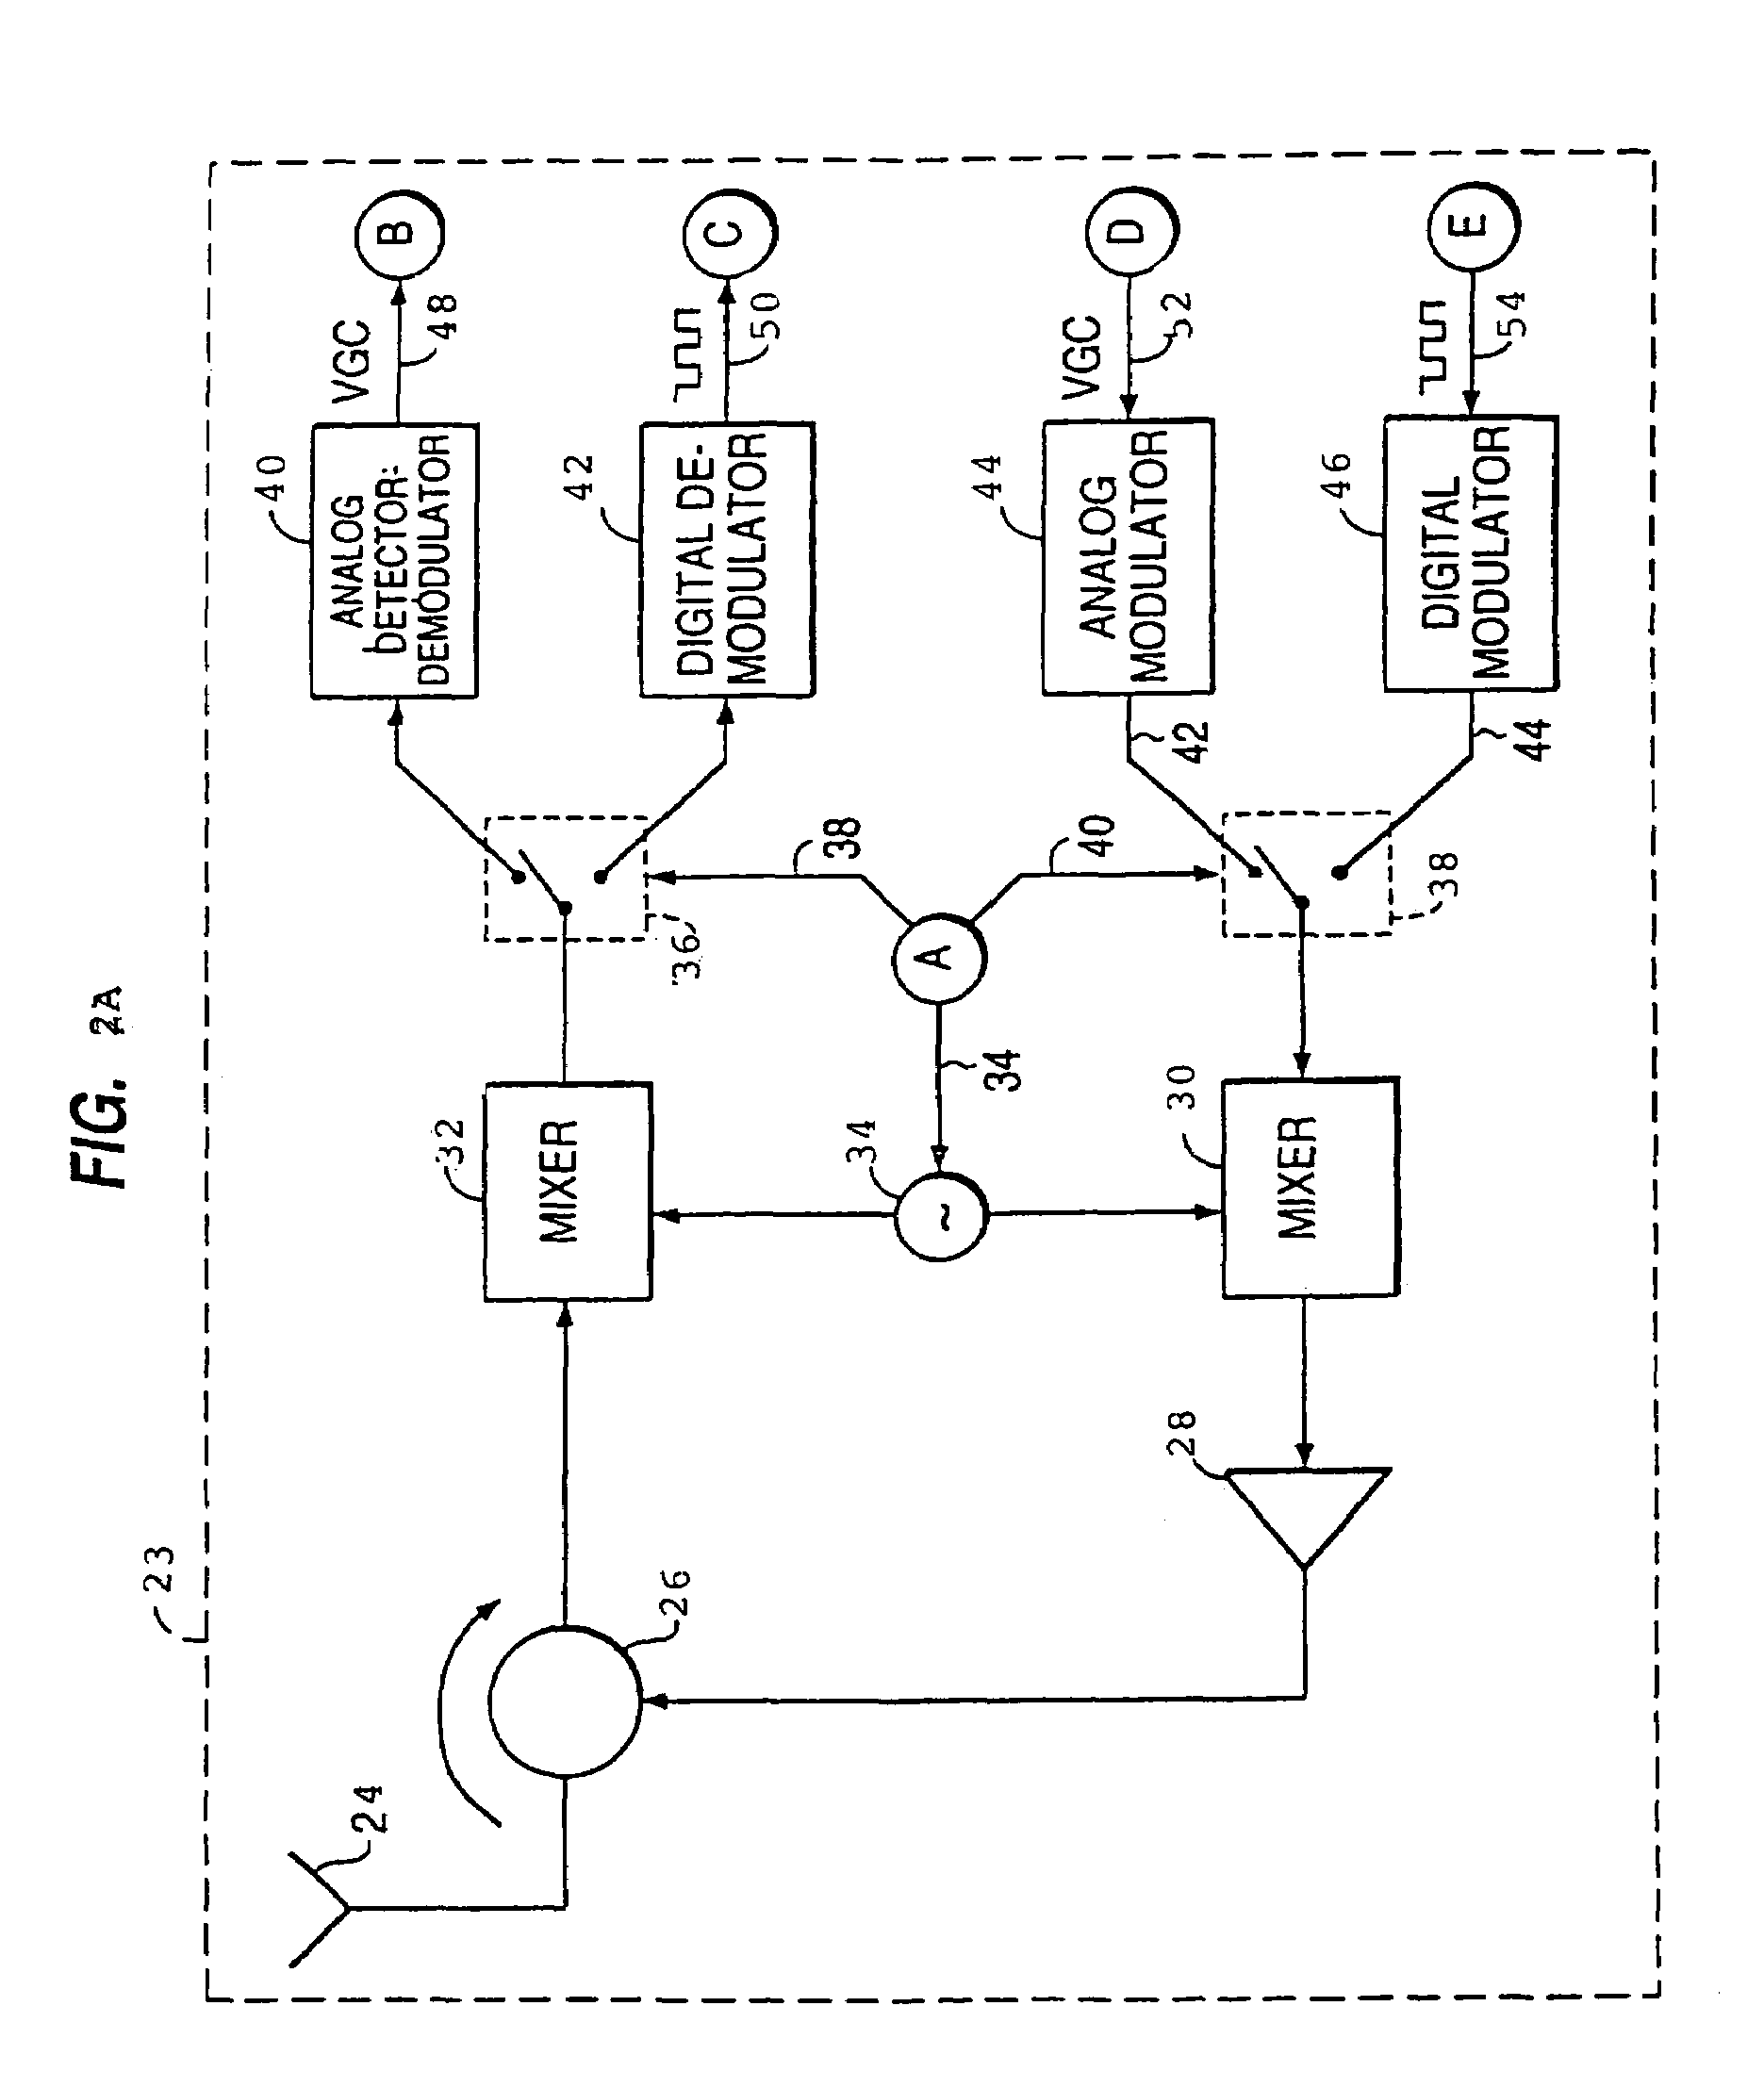 Tiered wireless, multi-modal access system and method